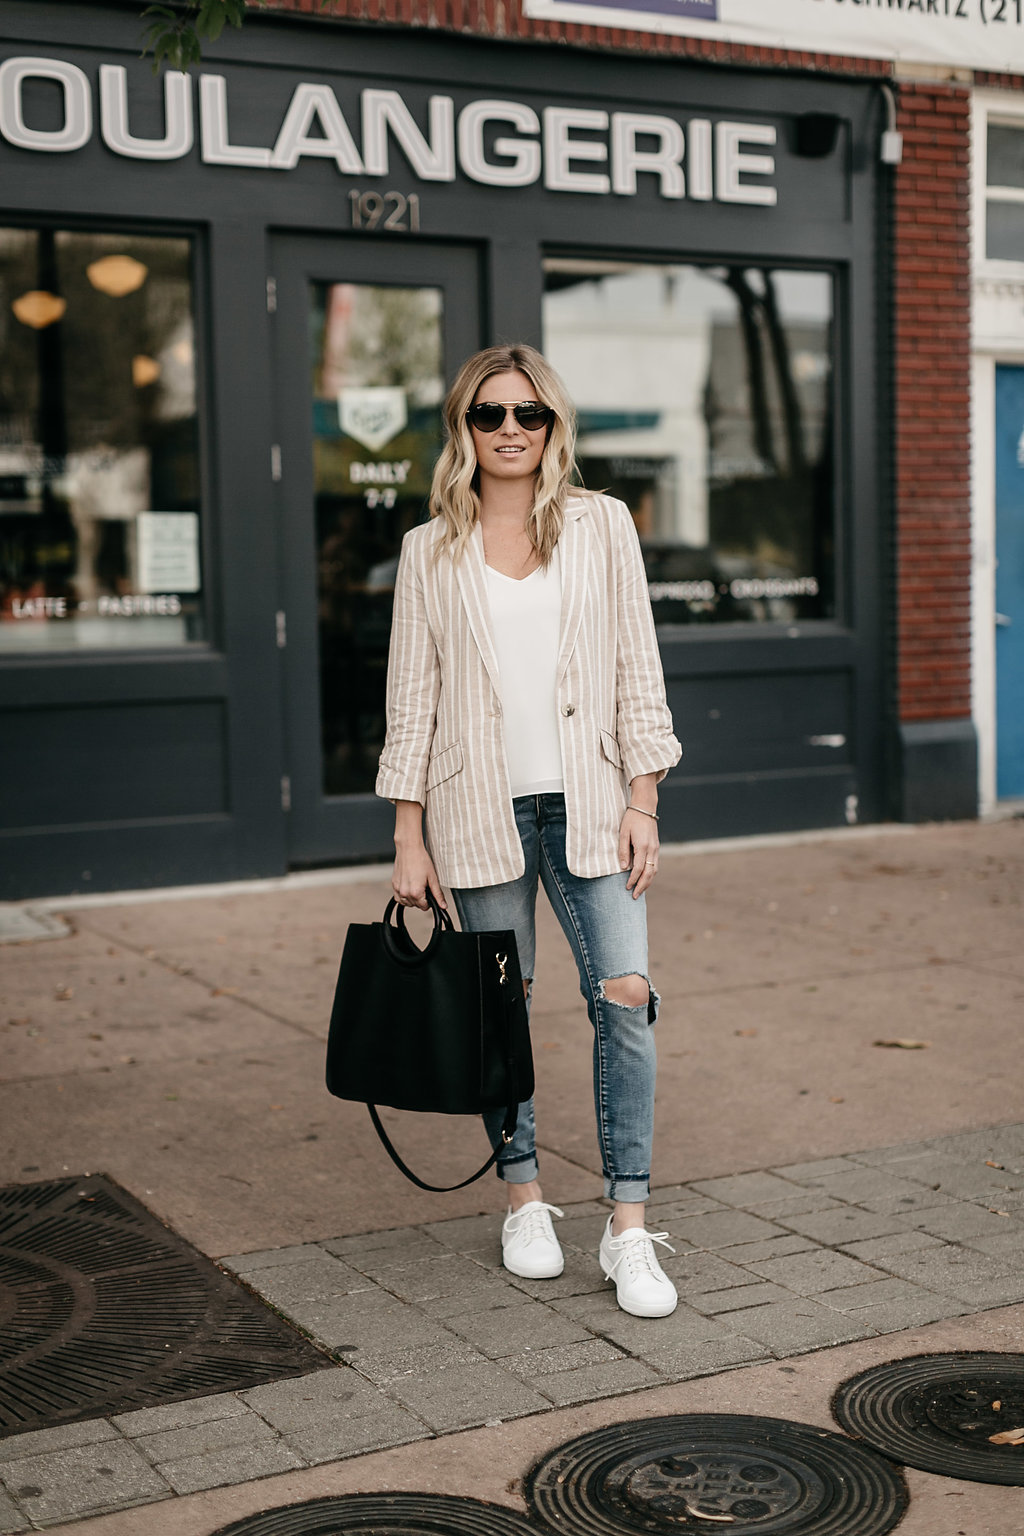 Fitflop shoes paired with trendy blazer and distressed jeans